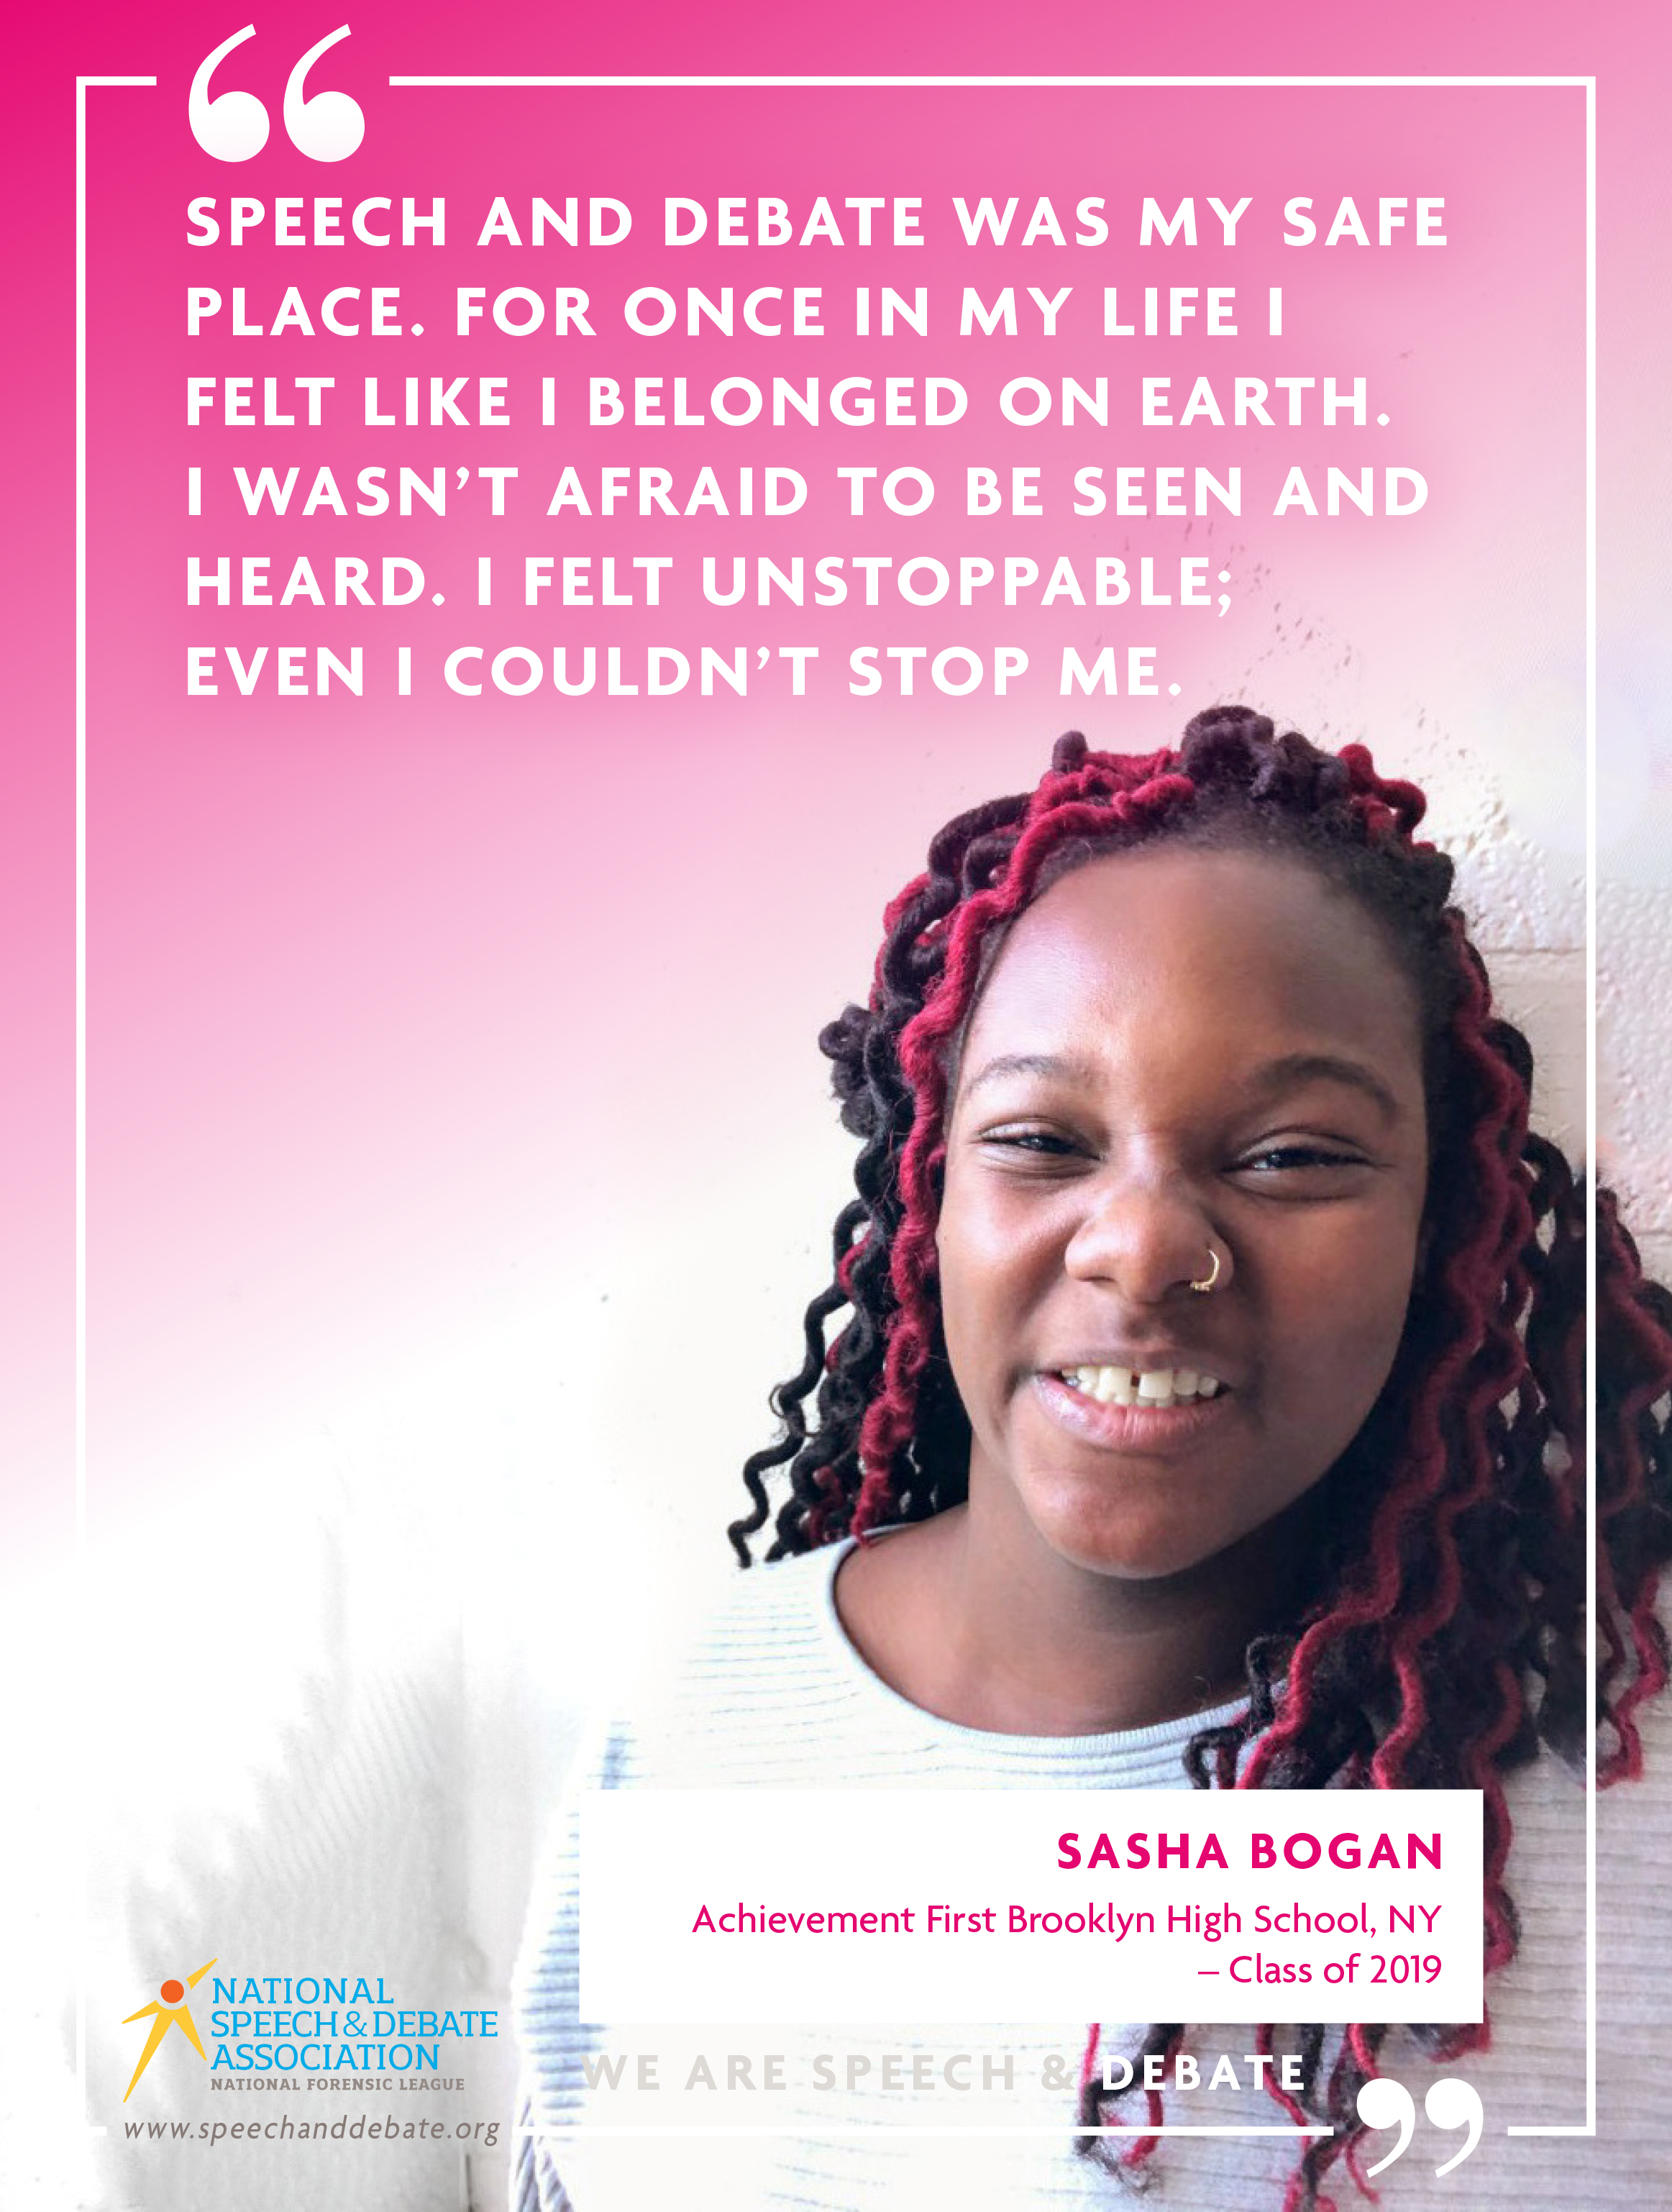 "SPEECH AND DEBATE WAS MY SAFE PLACE. FOR ONCE IN MY LIFE I FELT LIKE I BELONGED ON EARTH. I WASN’T AFRAID TO BE SEEN AND HEARD. I FELT UNSTOPPABLE; EVEN I COULDN’T STOP ME." - Sasha Bogan